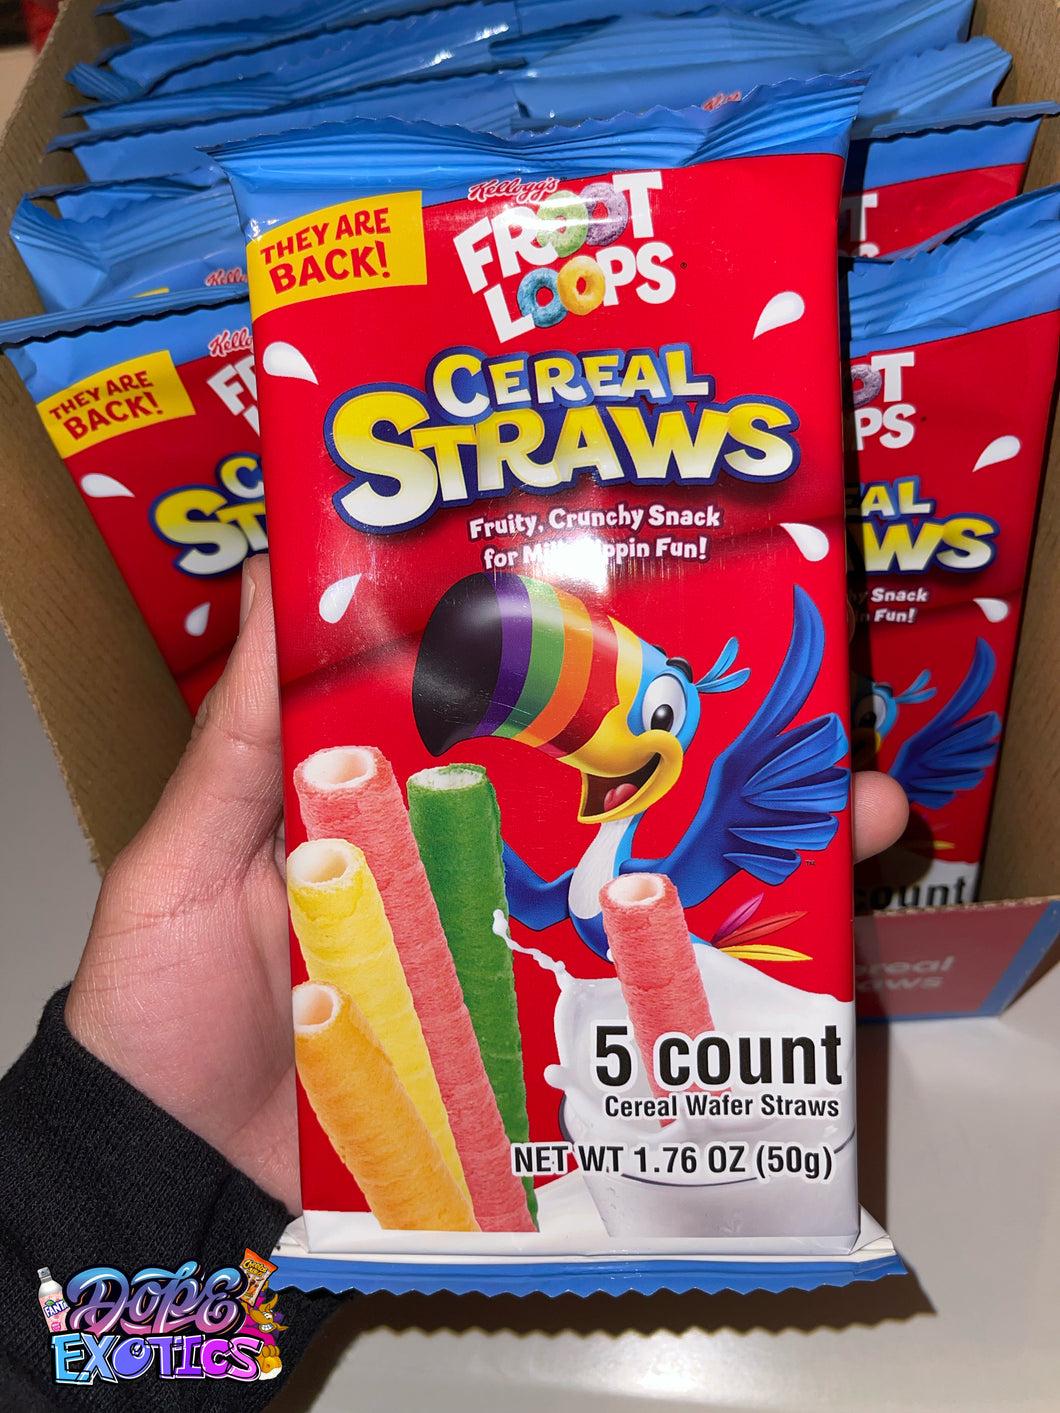 froot loops cereal straws